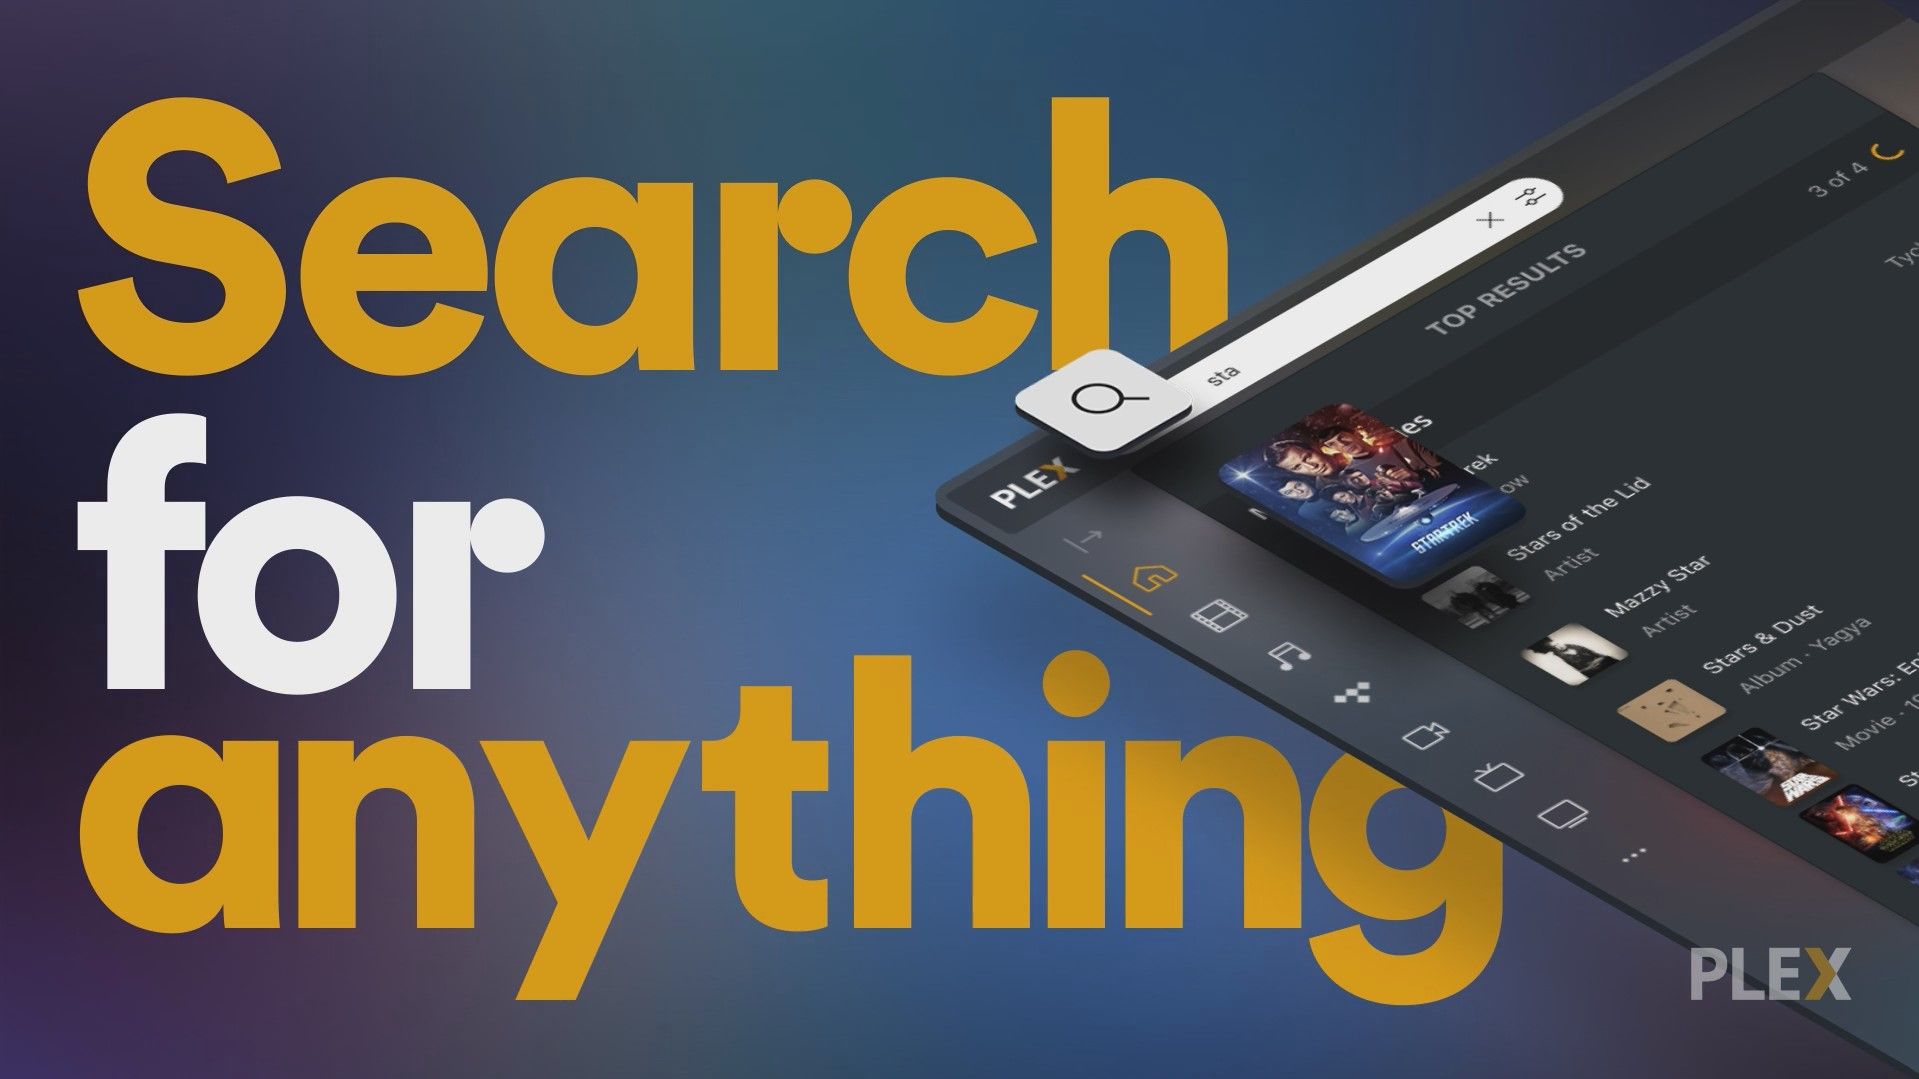 plex-discovery-search-for-anything